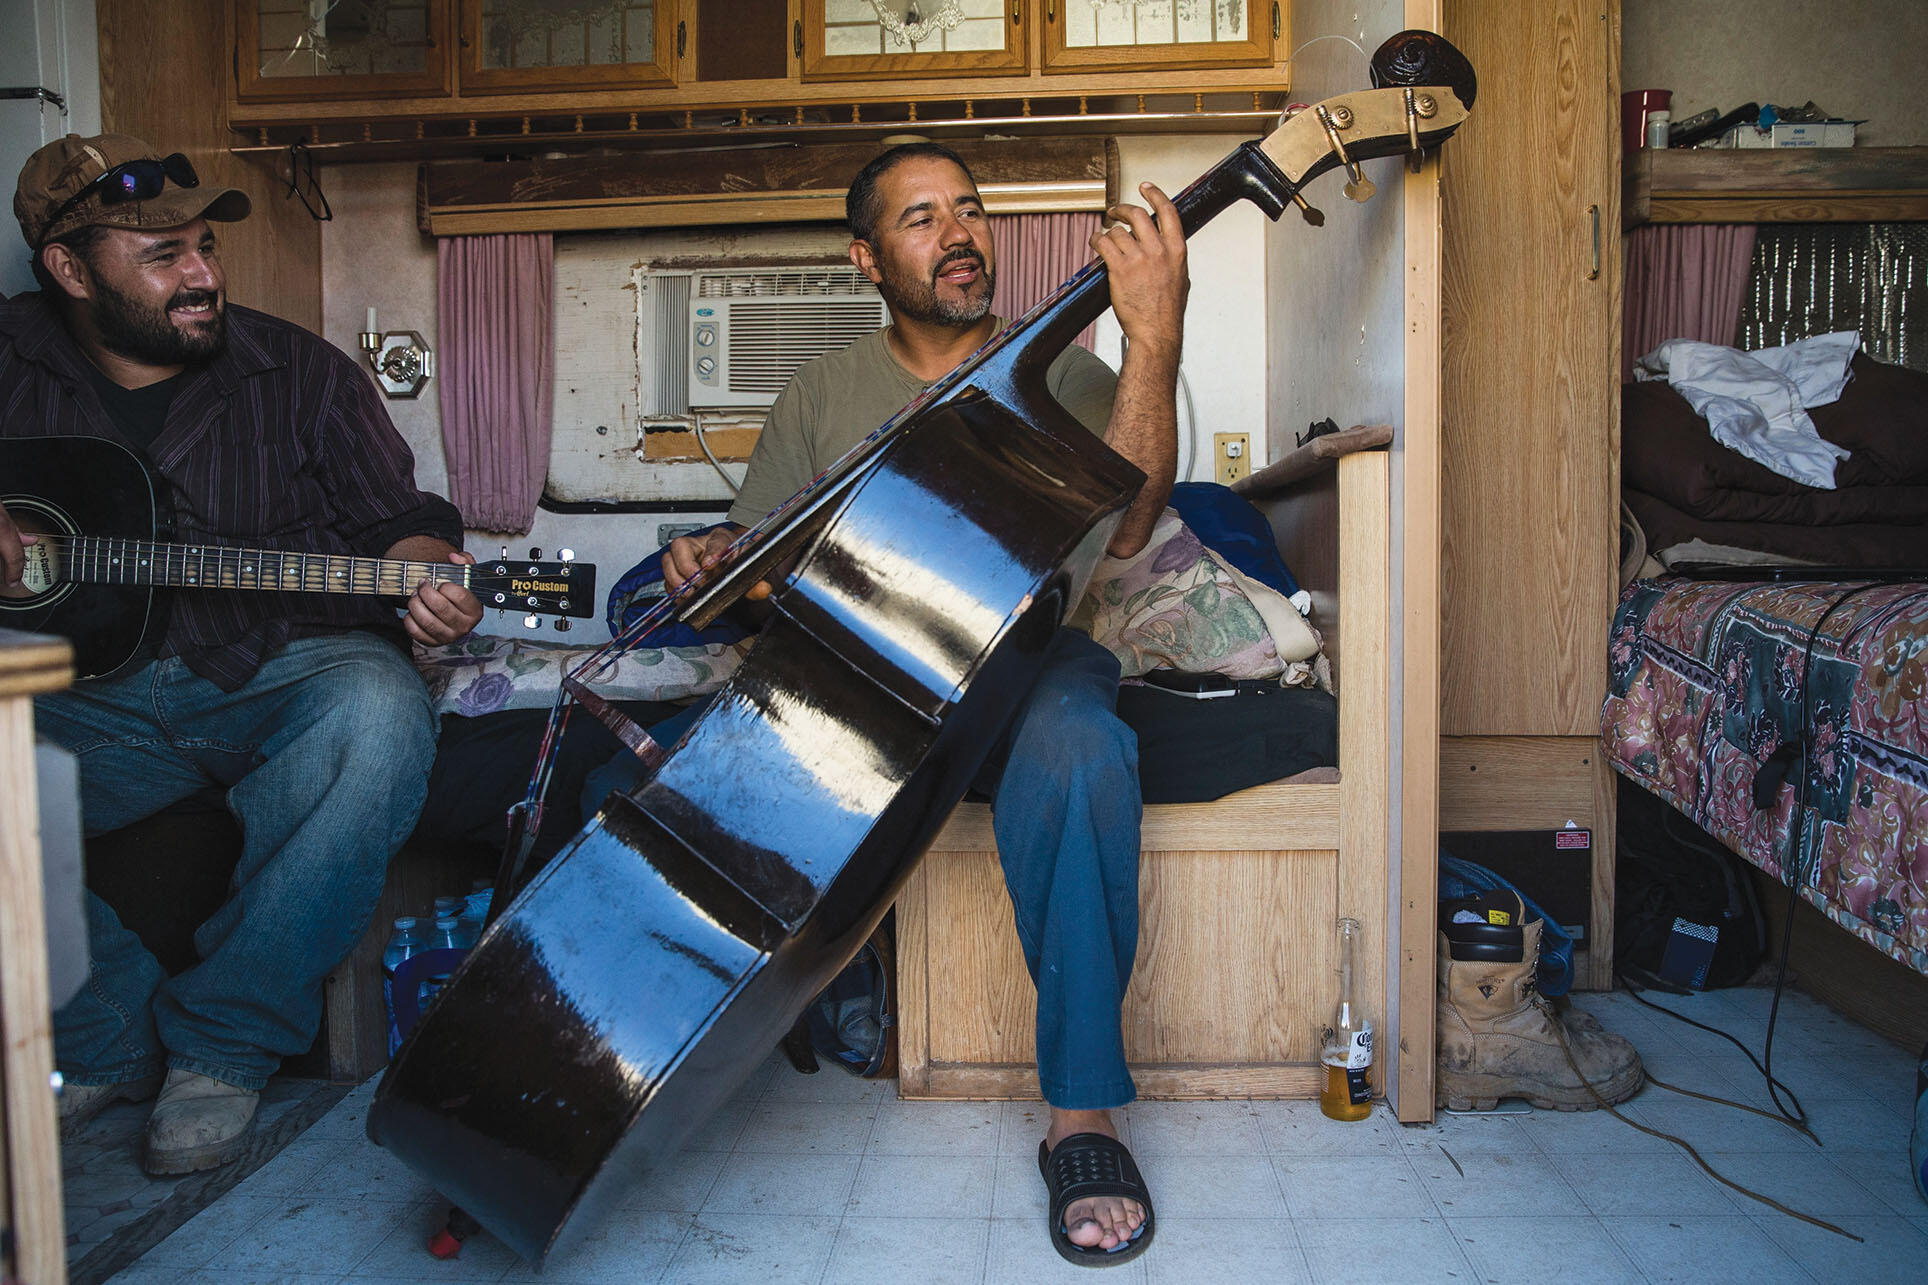 North Dakota has seen an influx of workers, such as these playing Latin American music, from around the globe due to its recent oil boom. (Photo by Andrew Burton/Getty Images.)